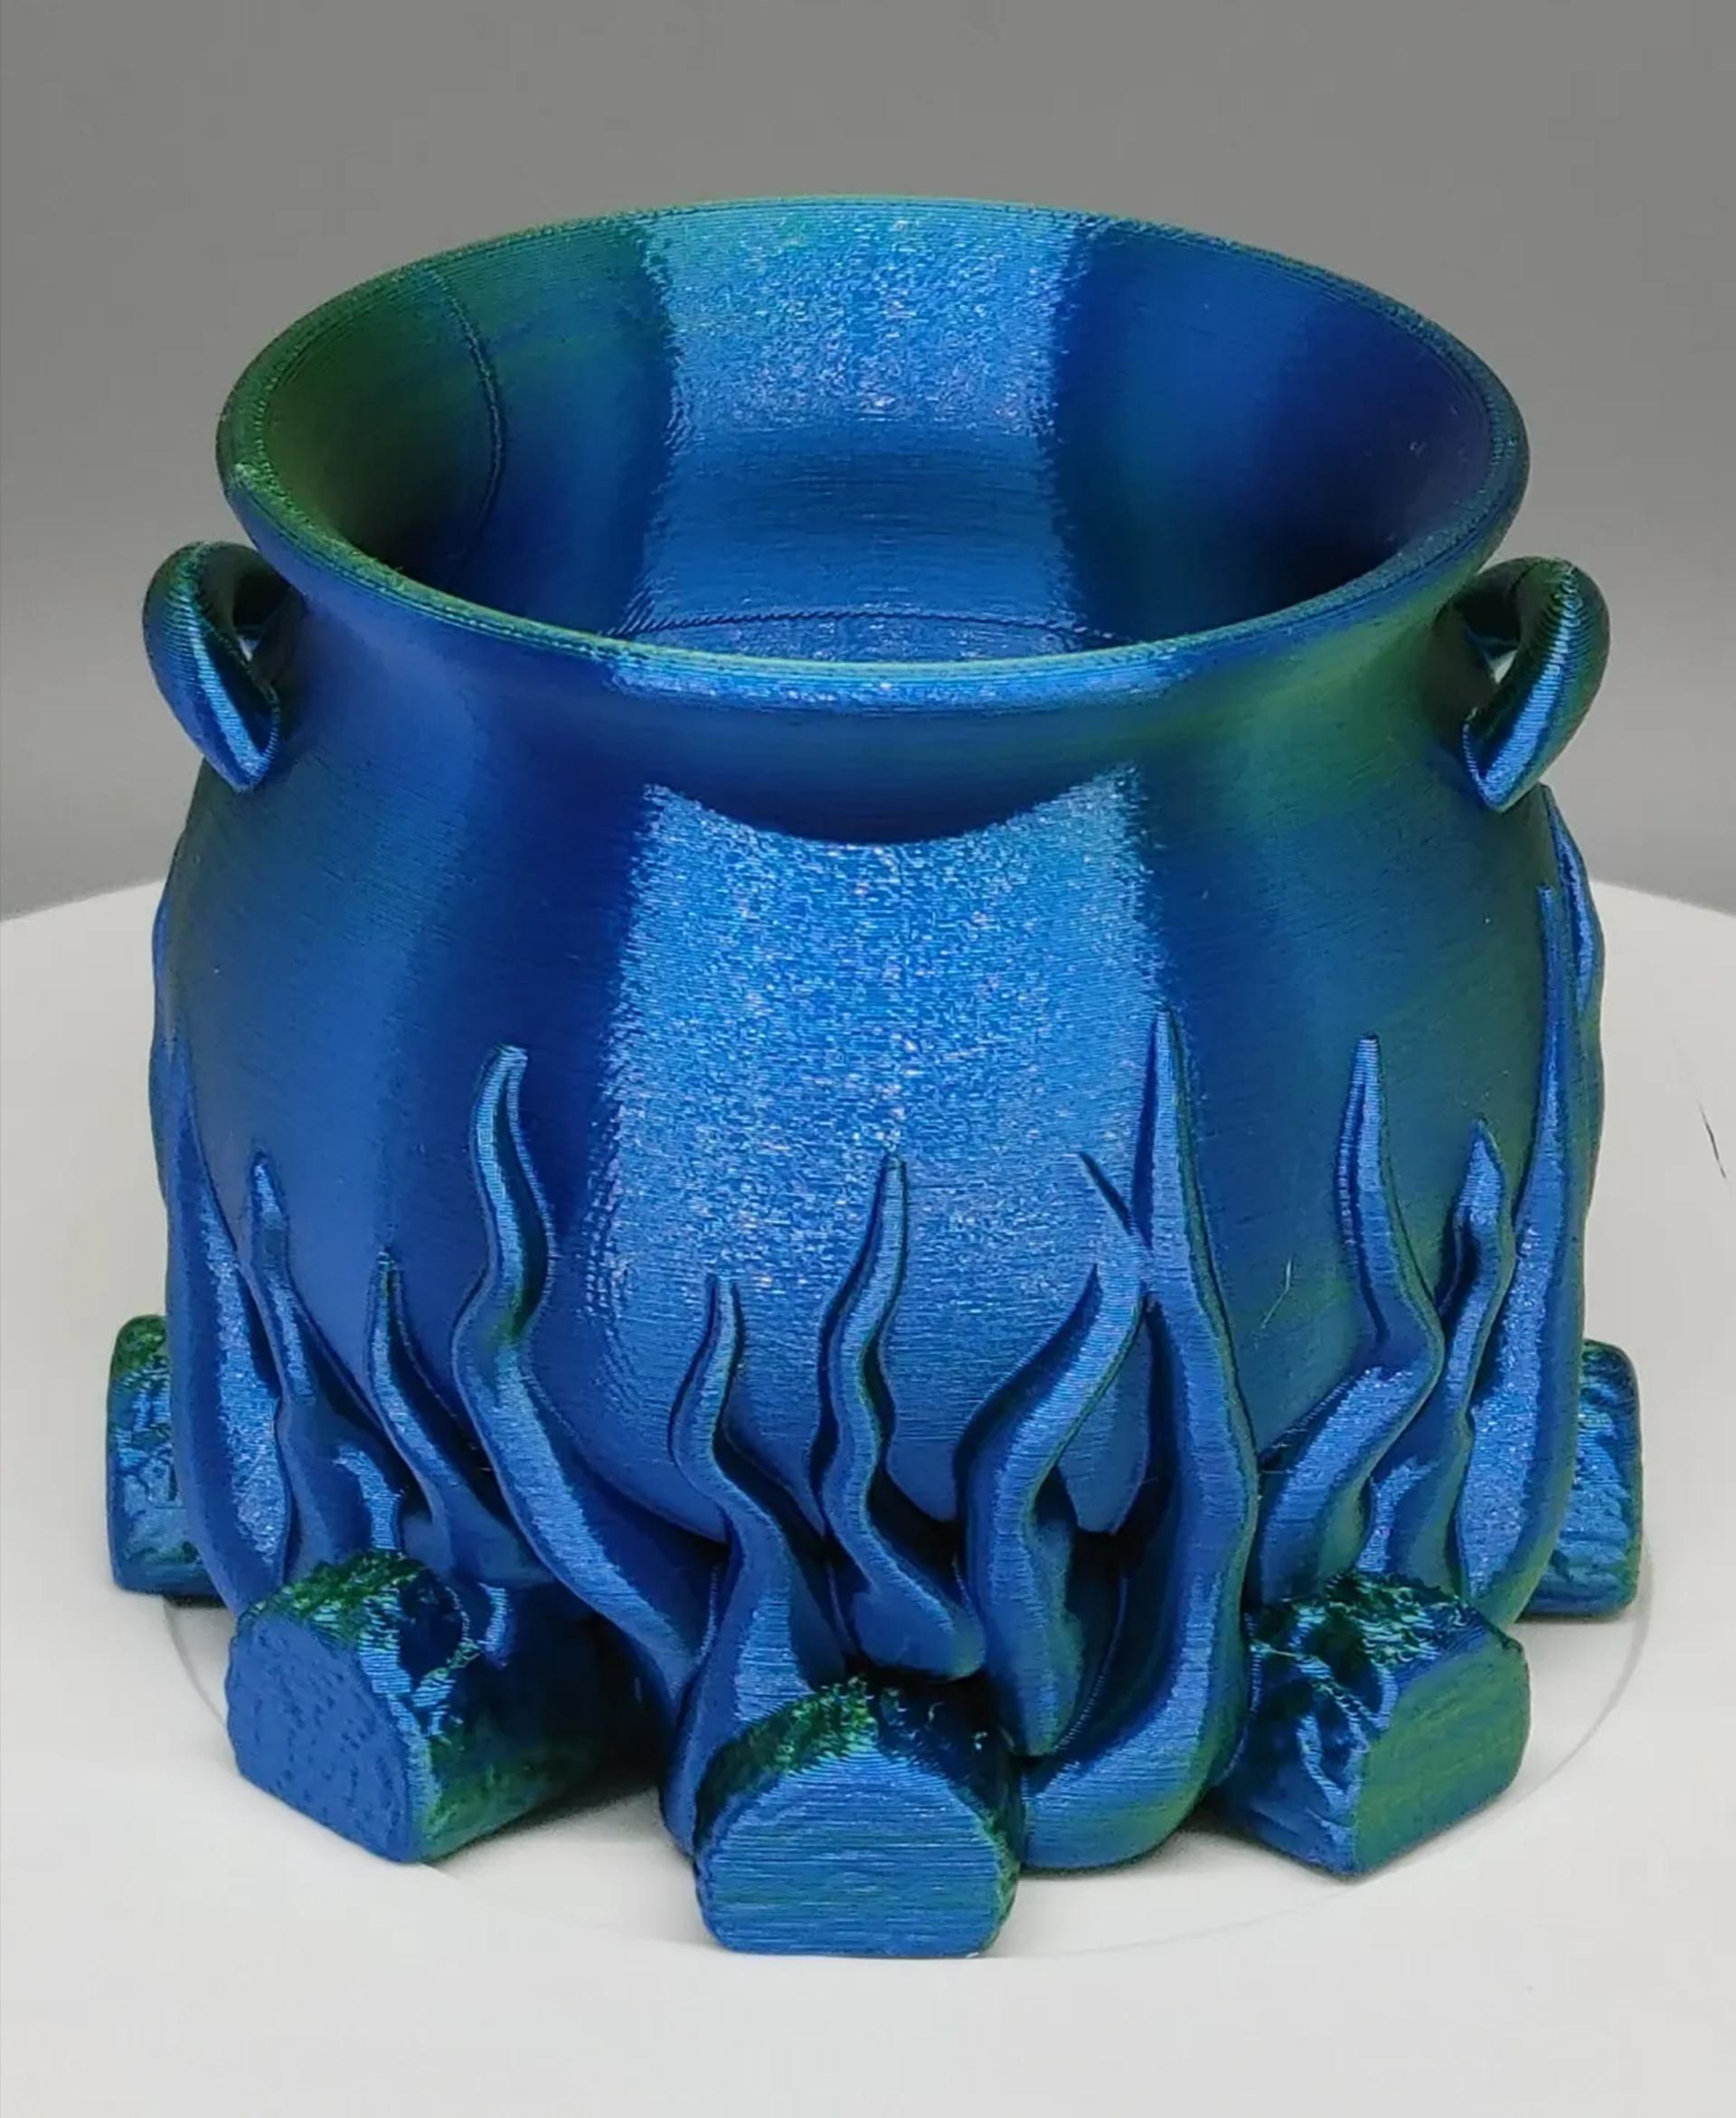 Flaming Cauldron - Another fantastic Halloween model from bugman_140! Printed without supports in Eryone dual color blue/green silk PLA on the MK3S+. I think it turned out beautifully! Such an amazing eye for detail. - 3d model